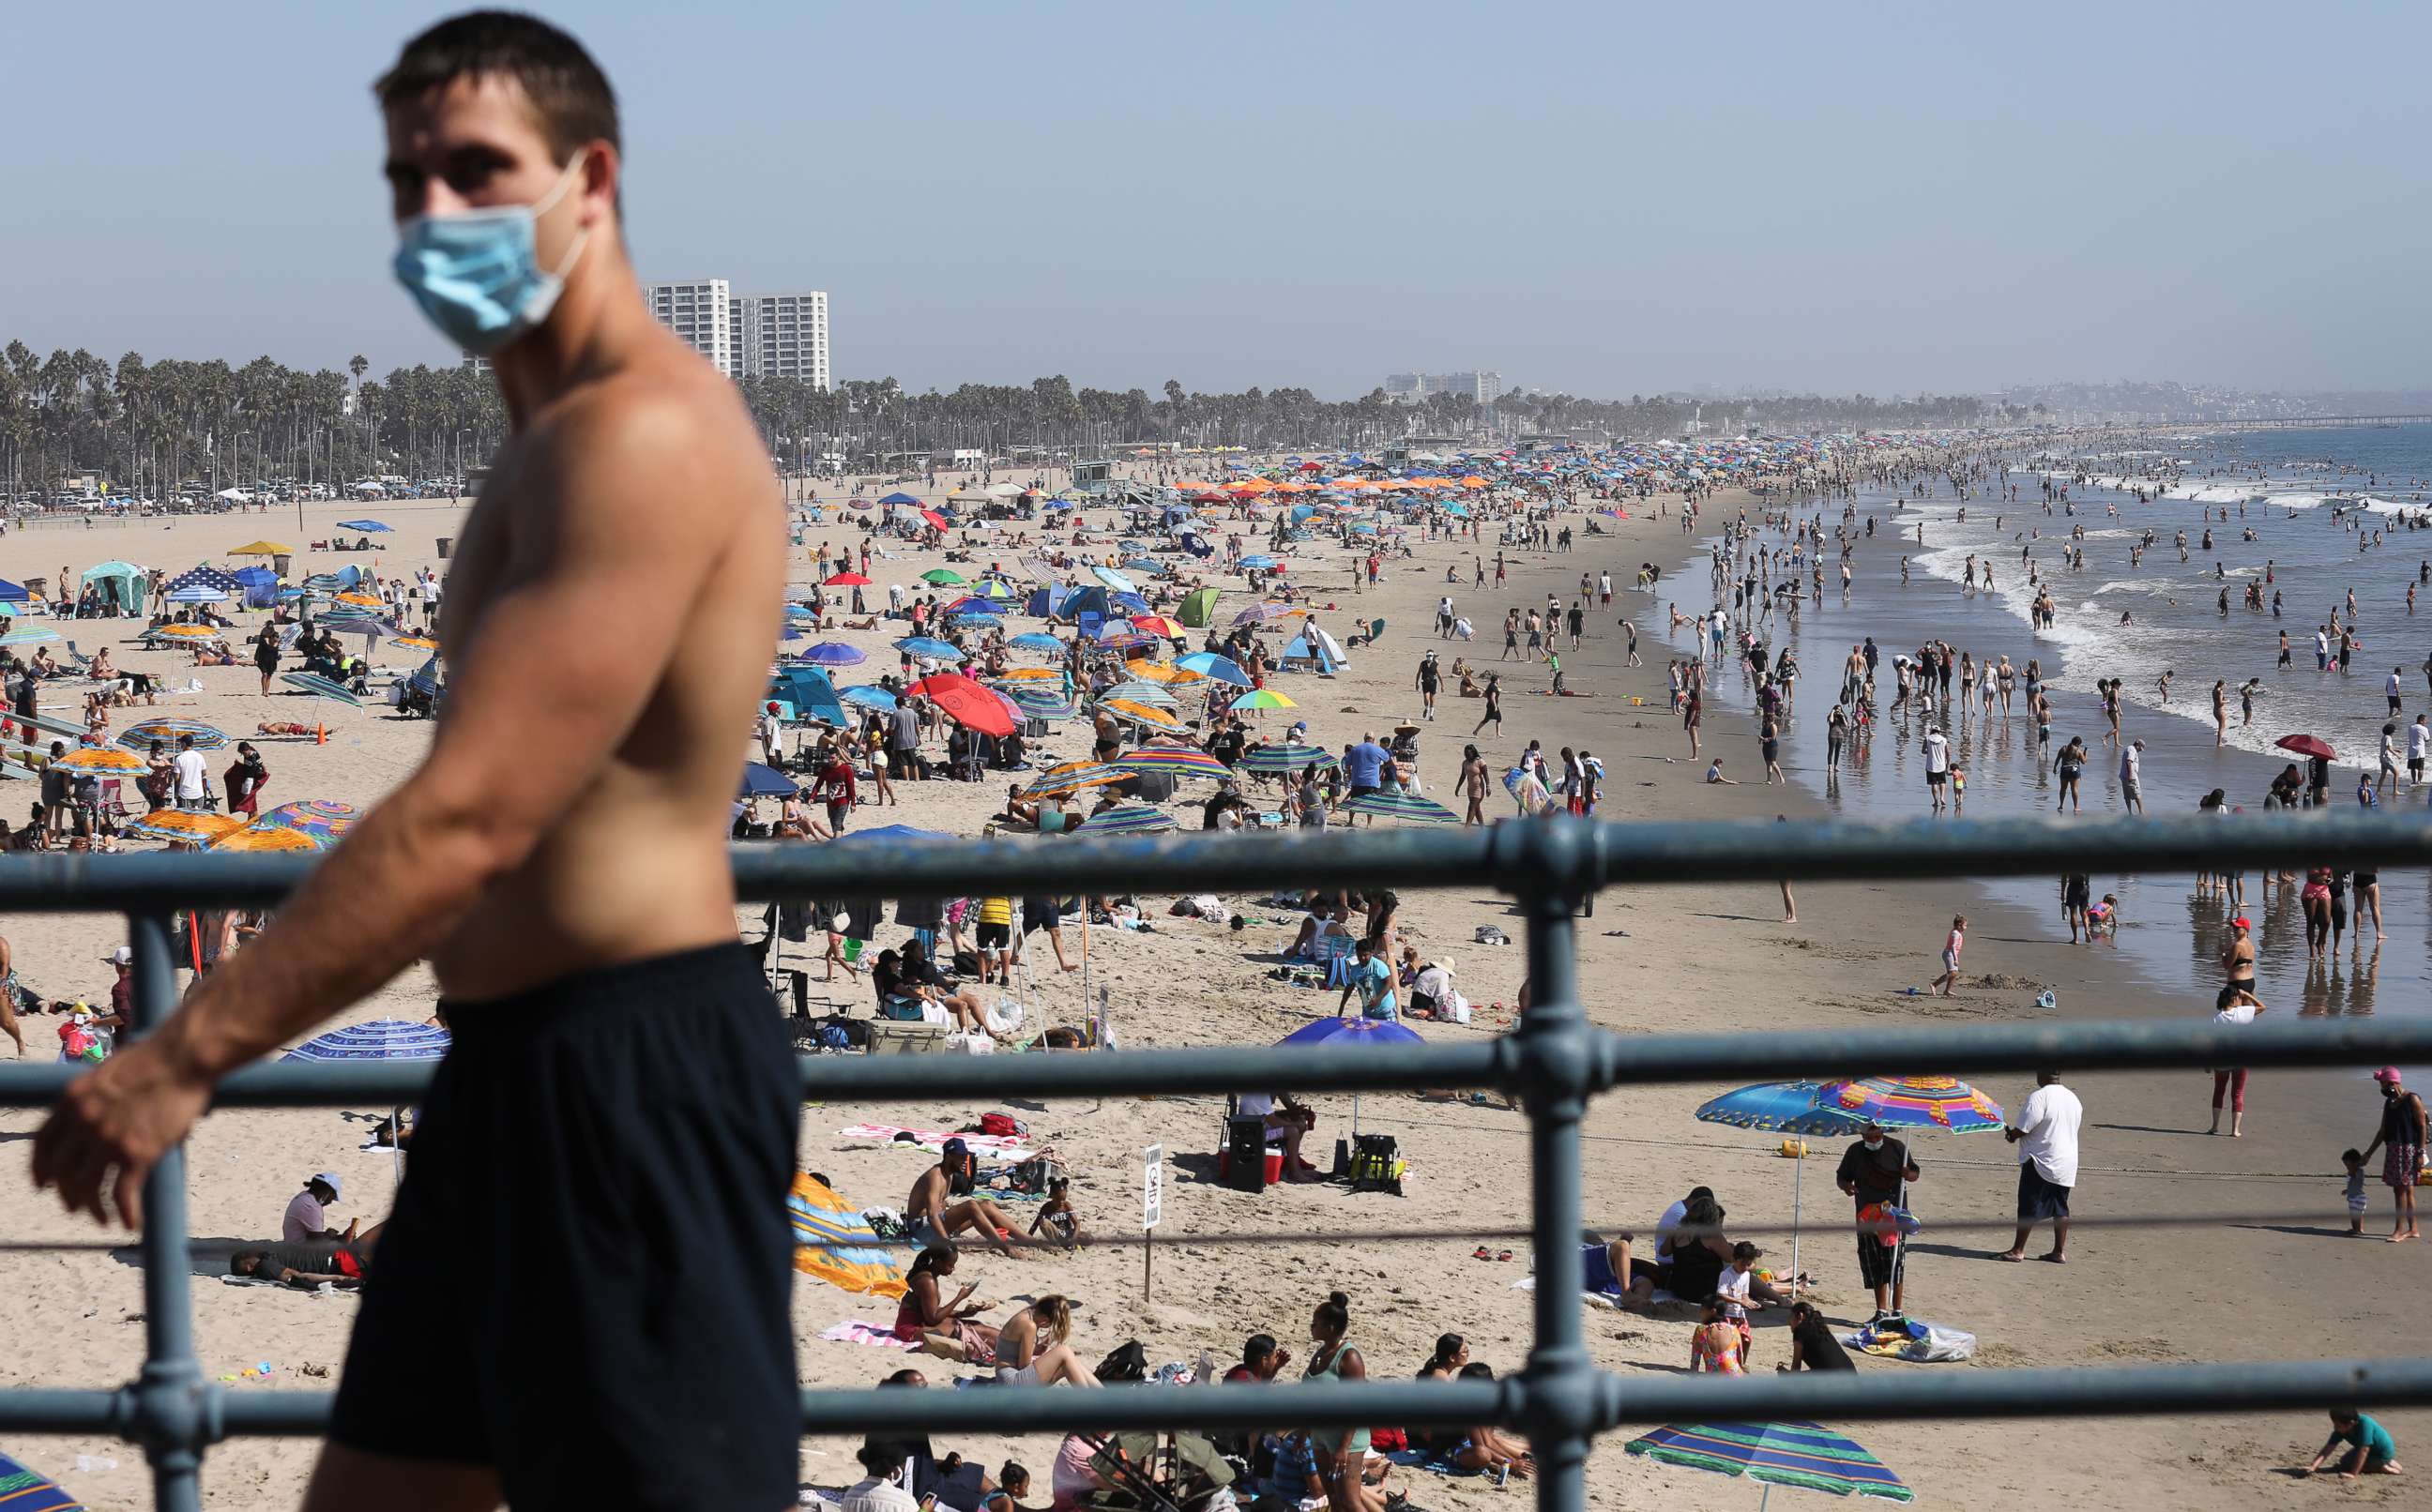 PHOTO: A man wears a face covering at the pier on the first day of the Labor Day weekend amid a heatwave on Sept. 5, 2020, in Santa Monica, Calif.